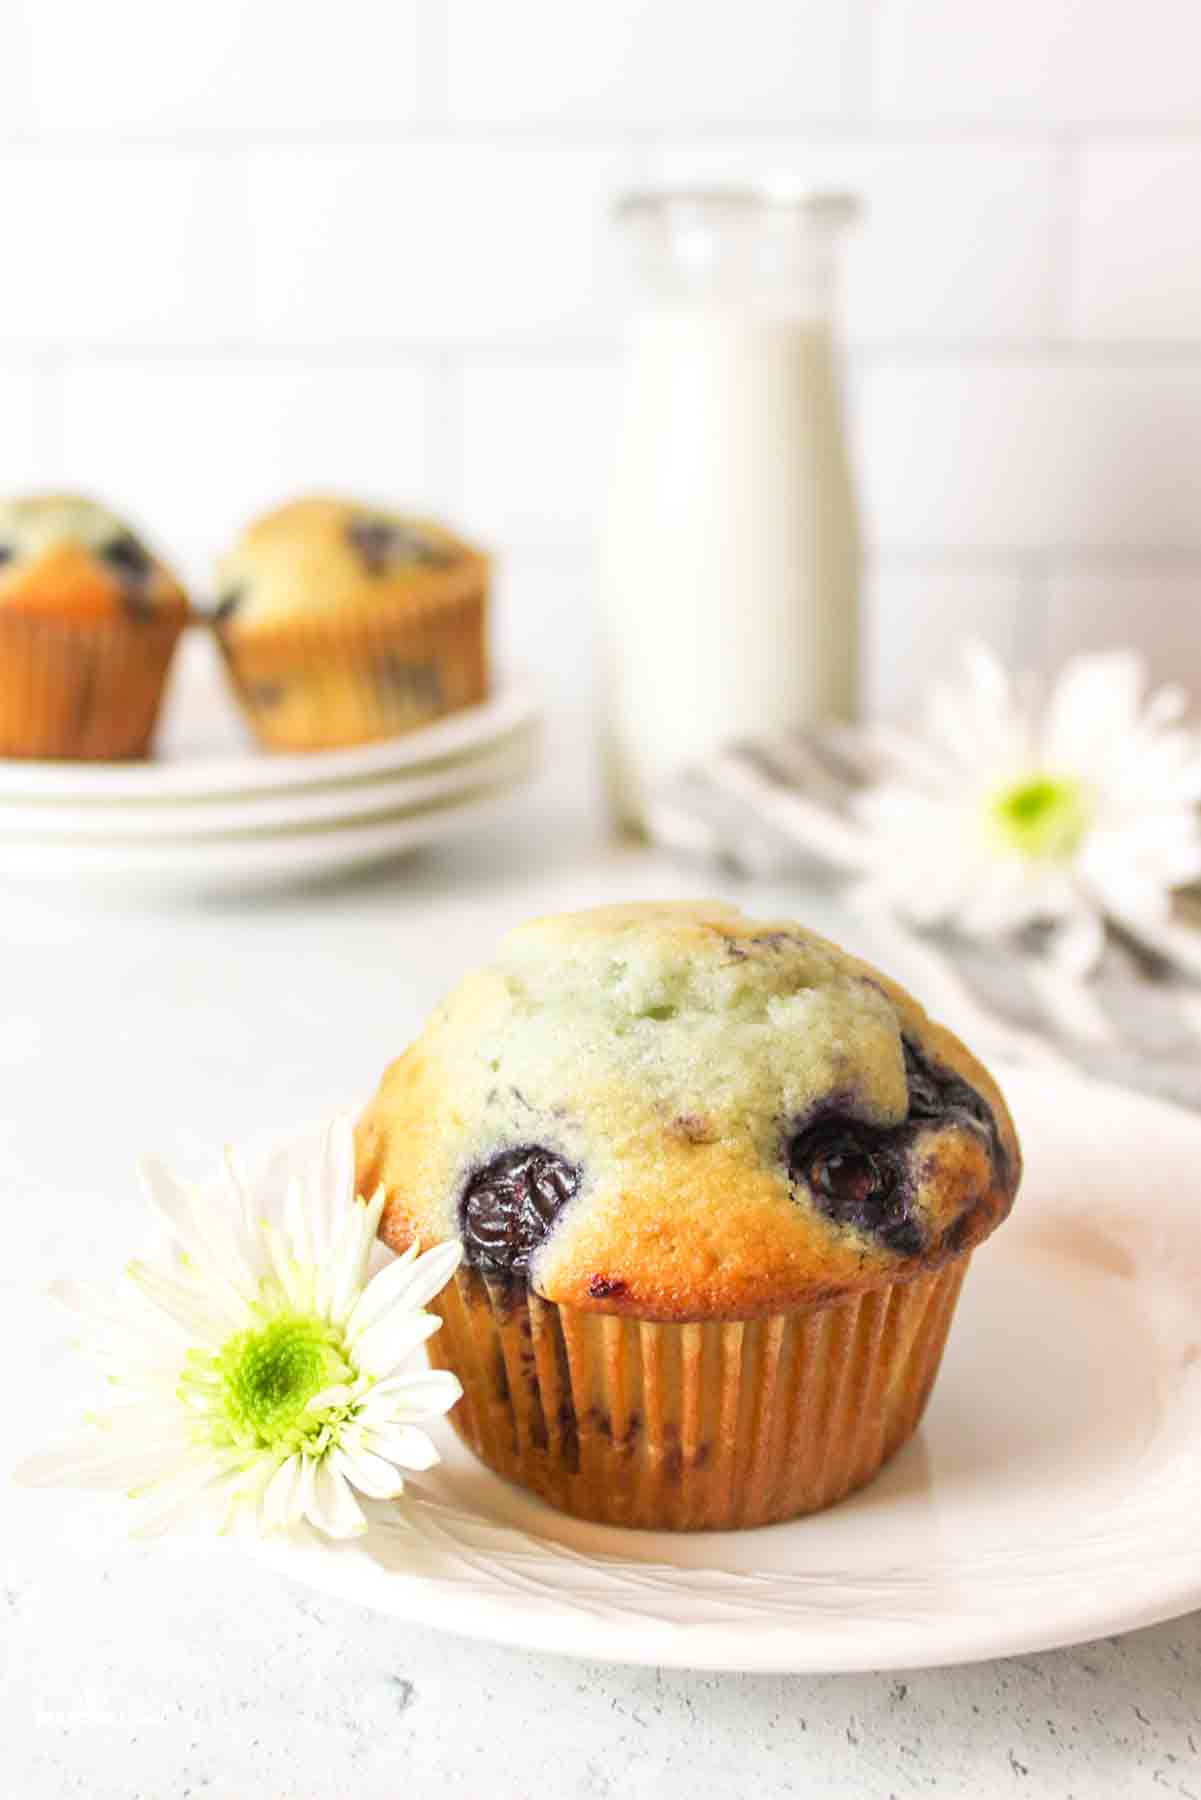 a blueberry muffin on a plate with a white flower.